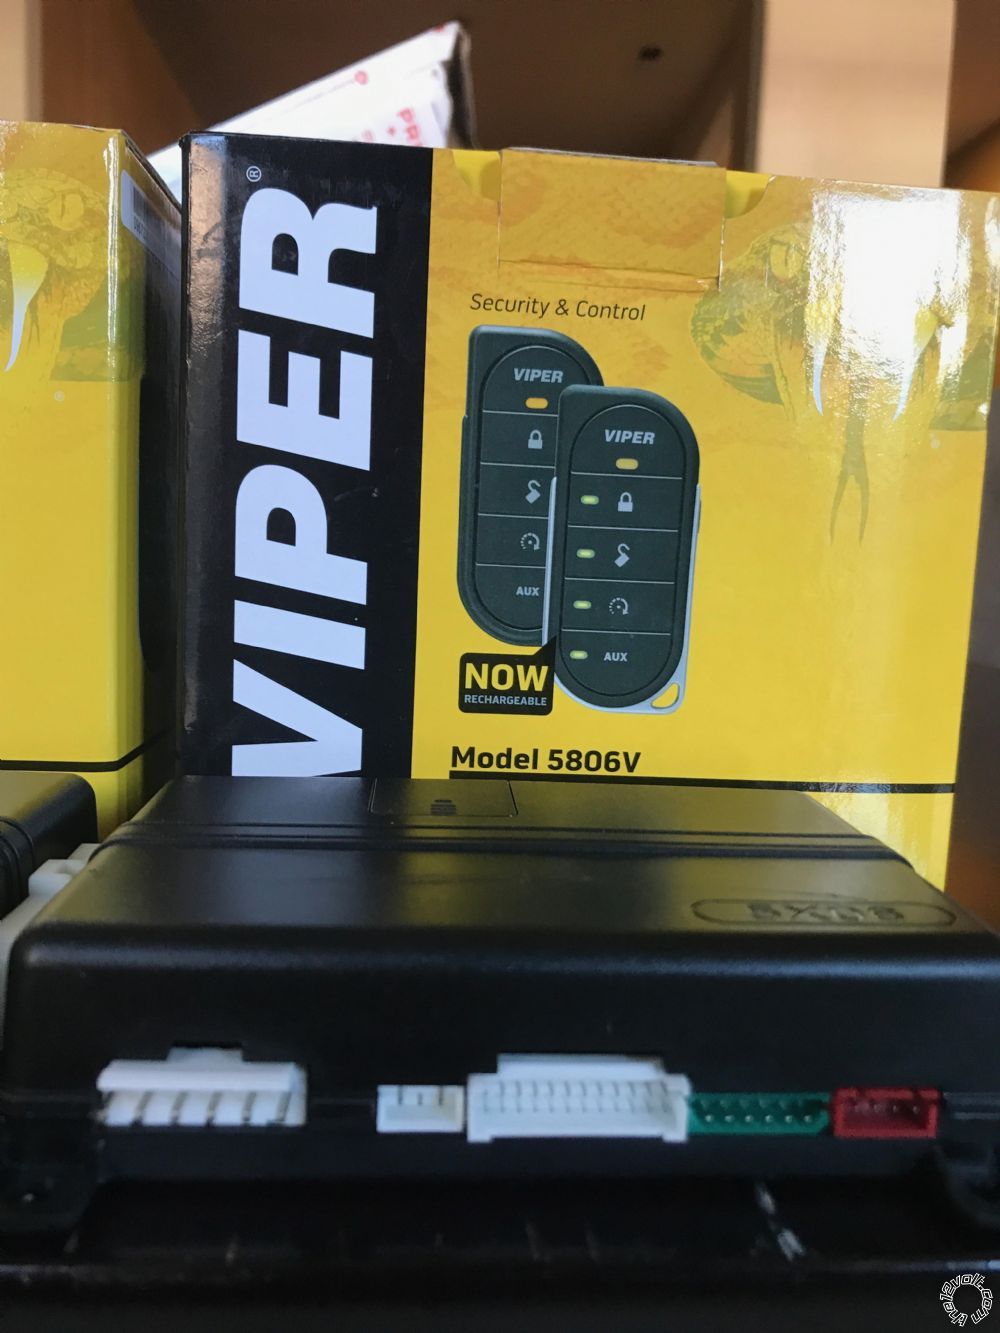 Can Anyone Explain the Viper 5806v Shut Off Switch? - Last Post -- posted image.